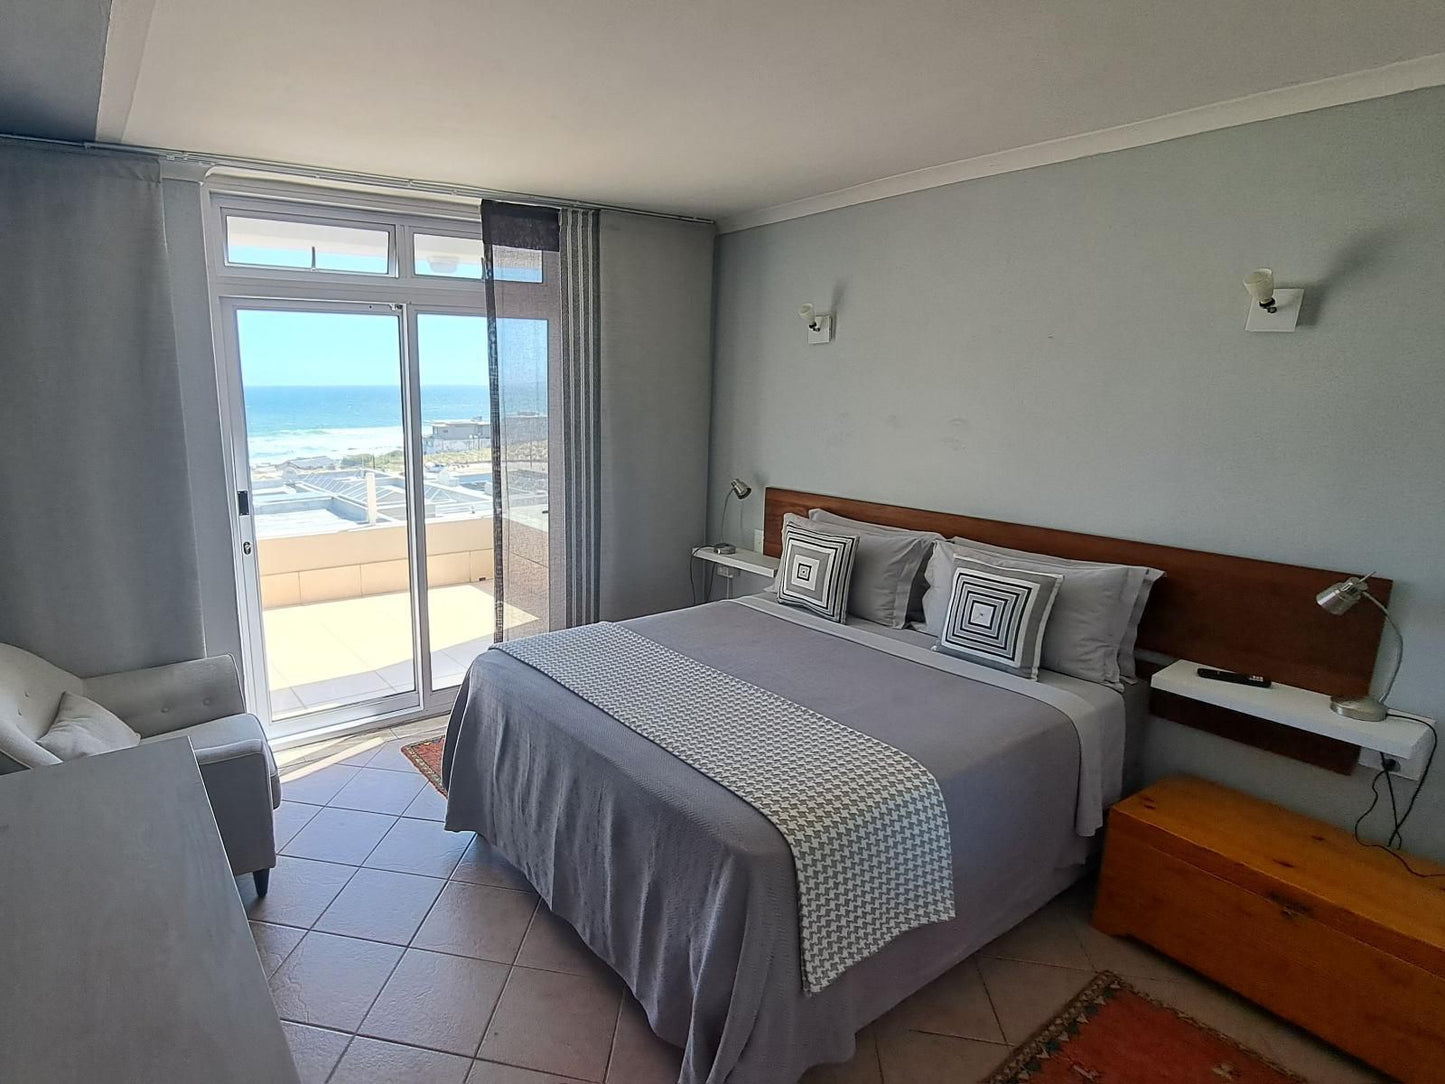 2Whitewaters Bloubergstrand Blouberg Western Cape South Africa Bedroom